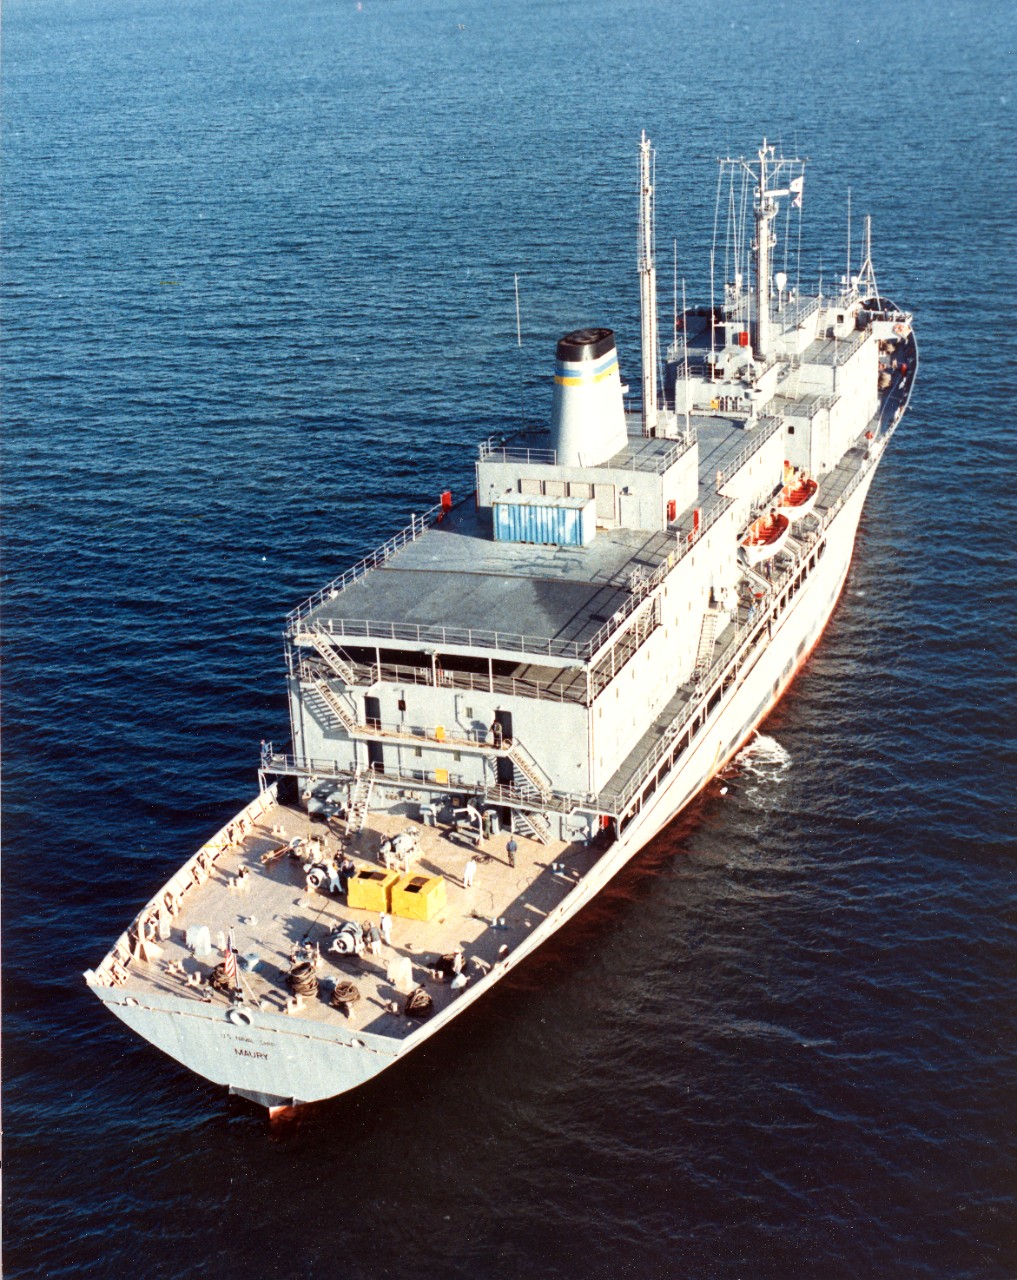 Collection of 52 images related to ships operated by the Military Sealift Command, including: USNS Waters (T-AGS-45), USNS Hayes (T-AGOR-16), USNS Range Sentinel (T-AGM-22), USNS Redstone (T-AGM-20), USNS Vanguard (T-AG-194), USNS Maury (T-AGS-66), USNS Bowditch (T-AGS-62), USNS Furman (T-AK-280), USNS H.H. Hess(T-AGS-38), USNS Neptune (ARC-2), USNS Albert J. Myer (ARC-6), MV Dolores Chouest, and DSVSS Laney Chouest.